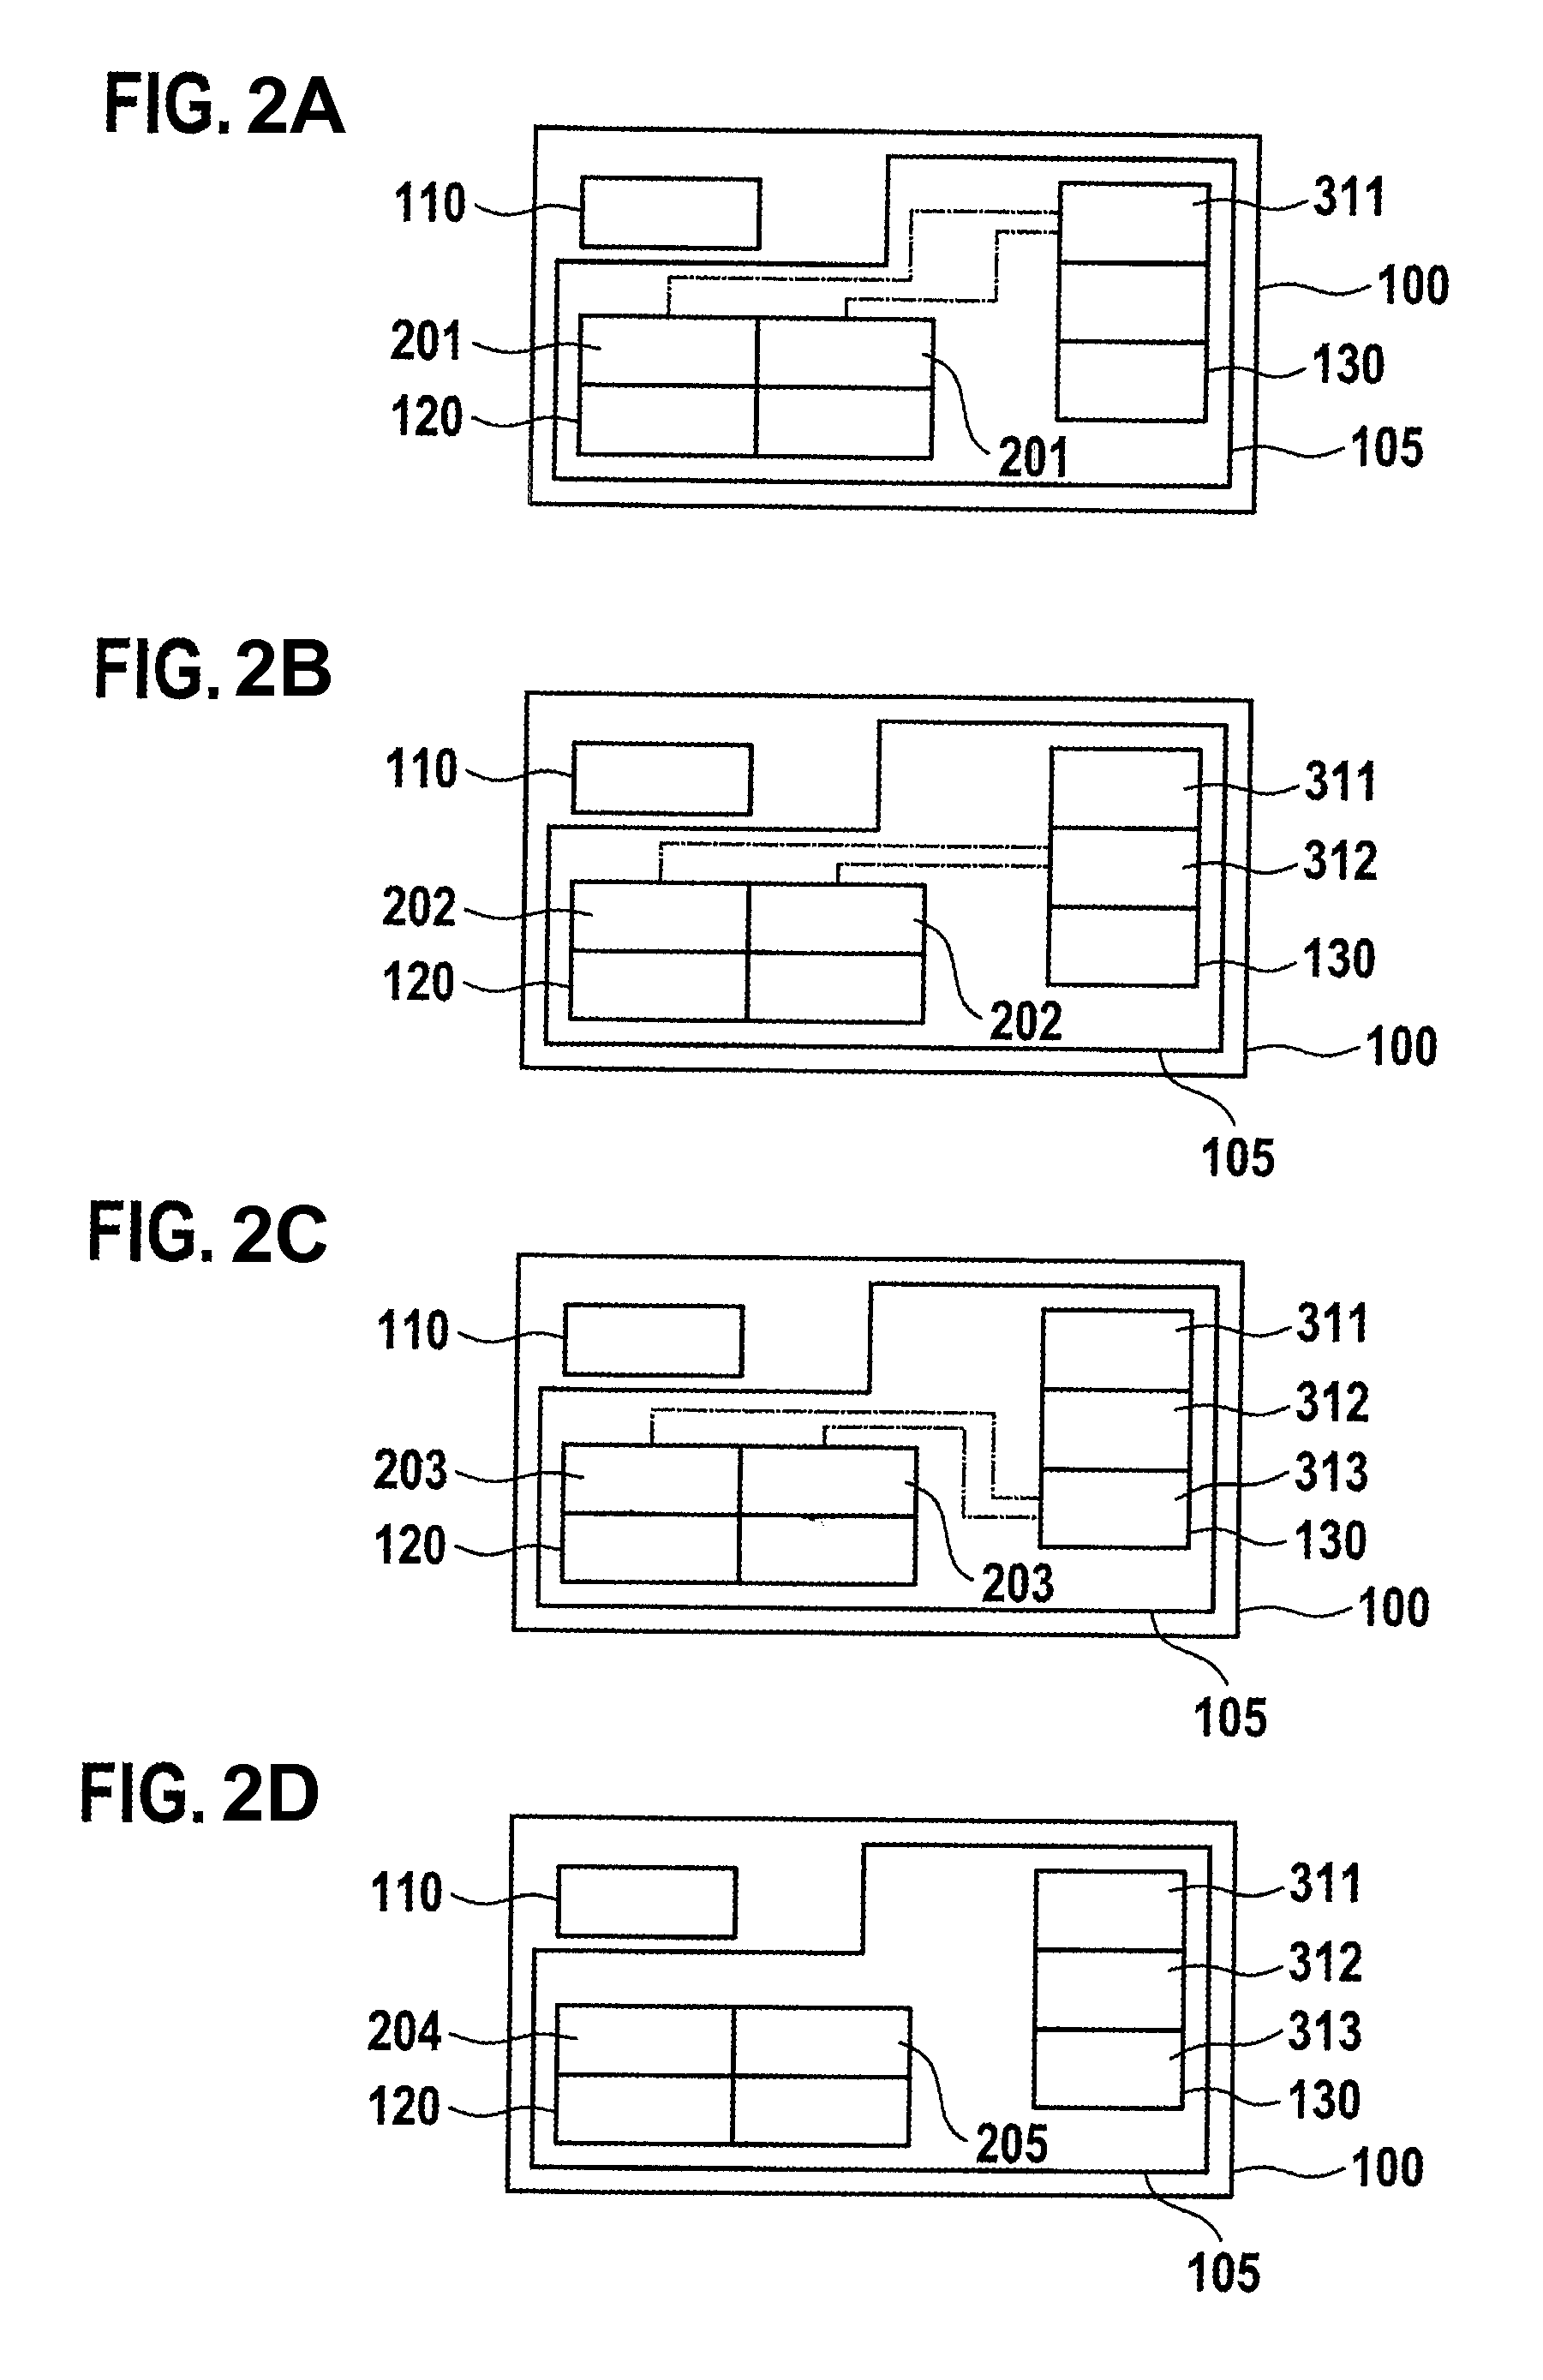 Method for generating a cryptographic key in a system-on-a-chip